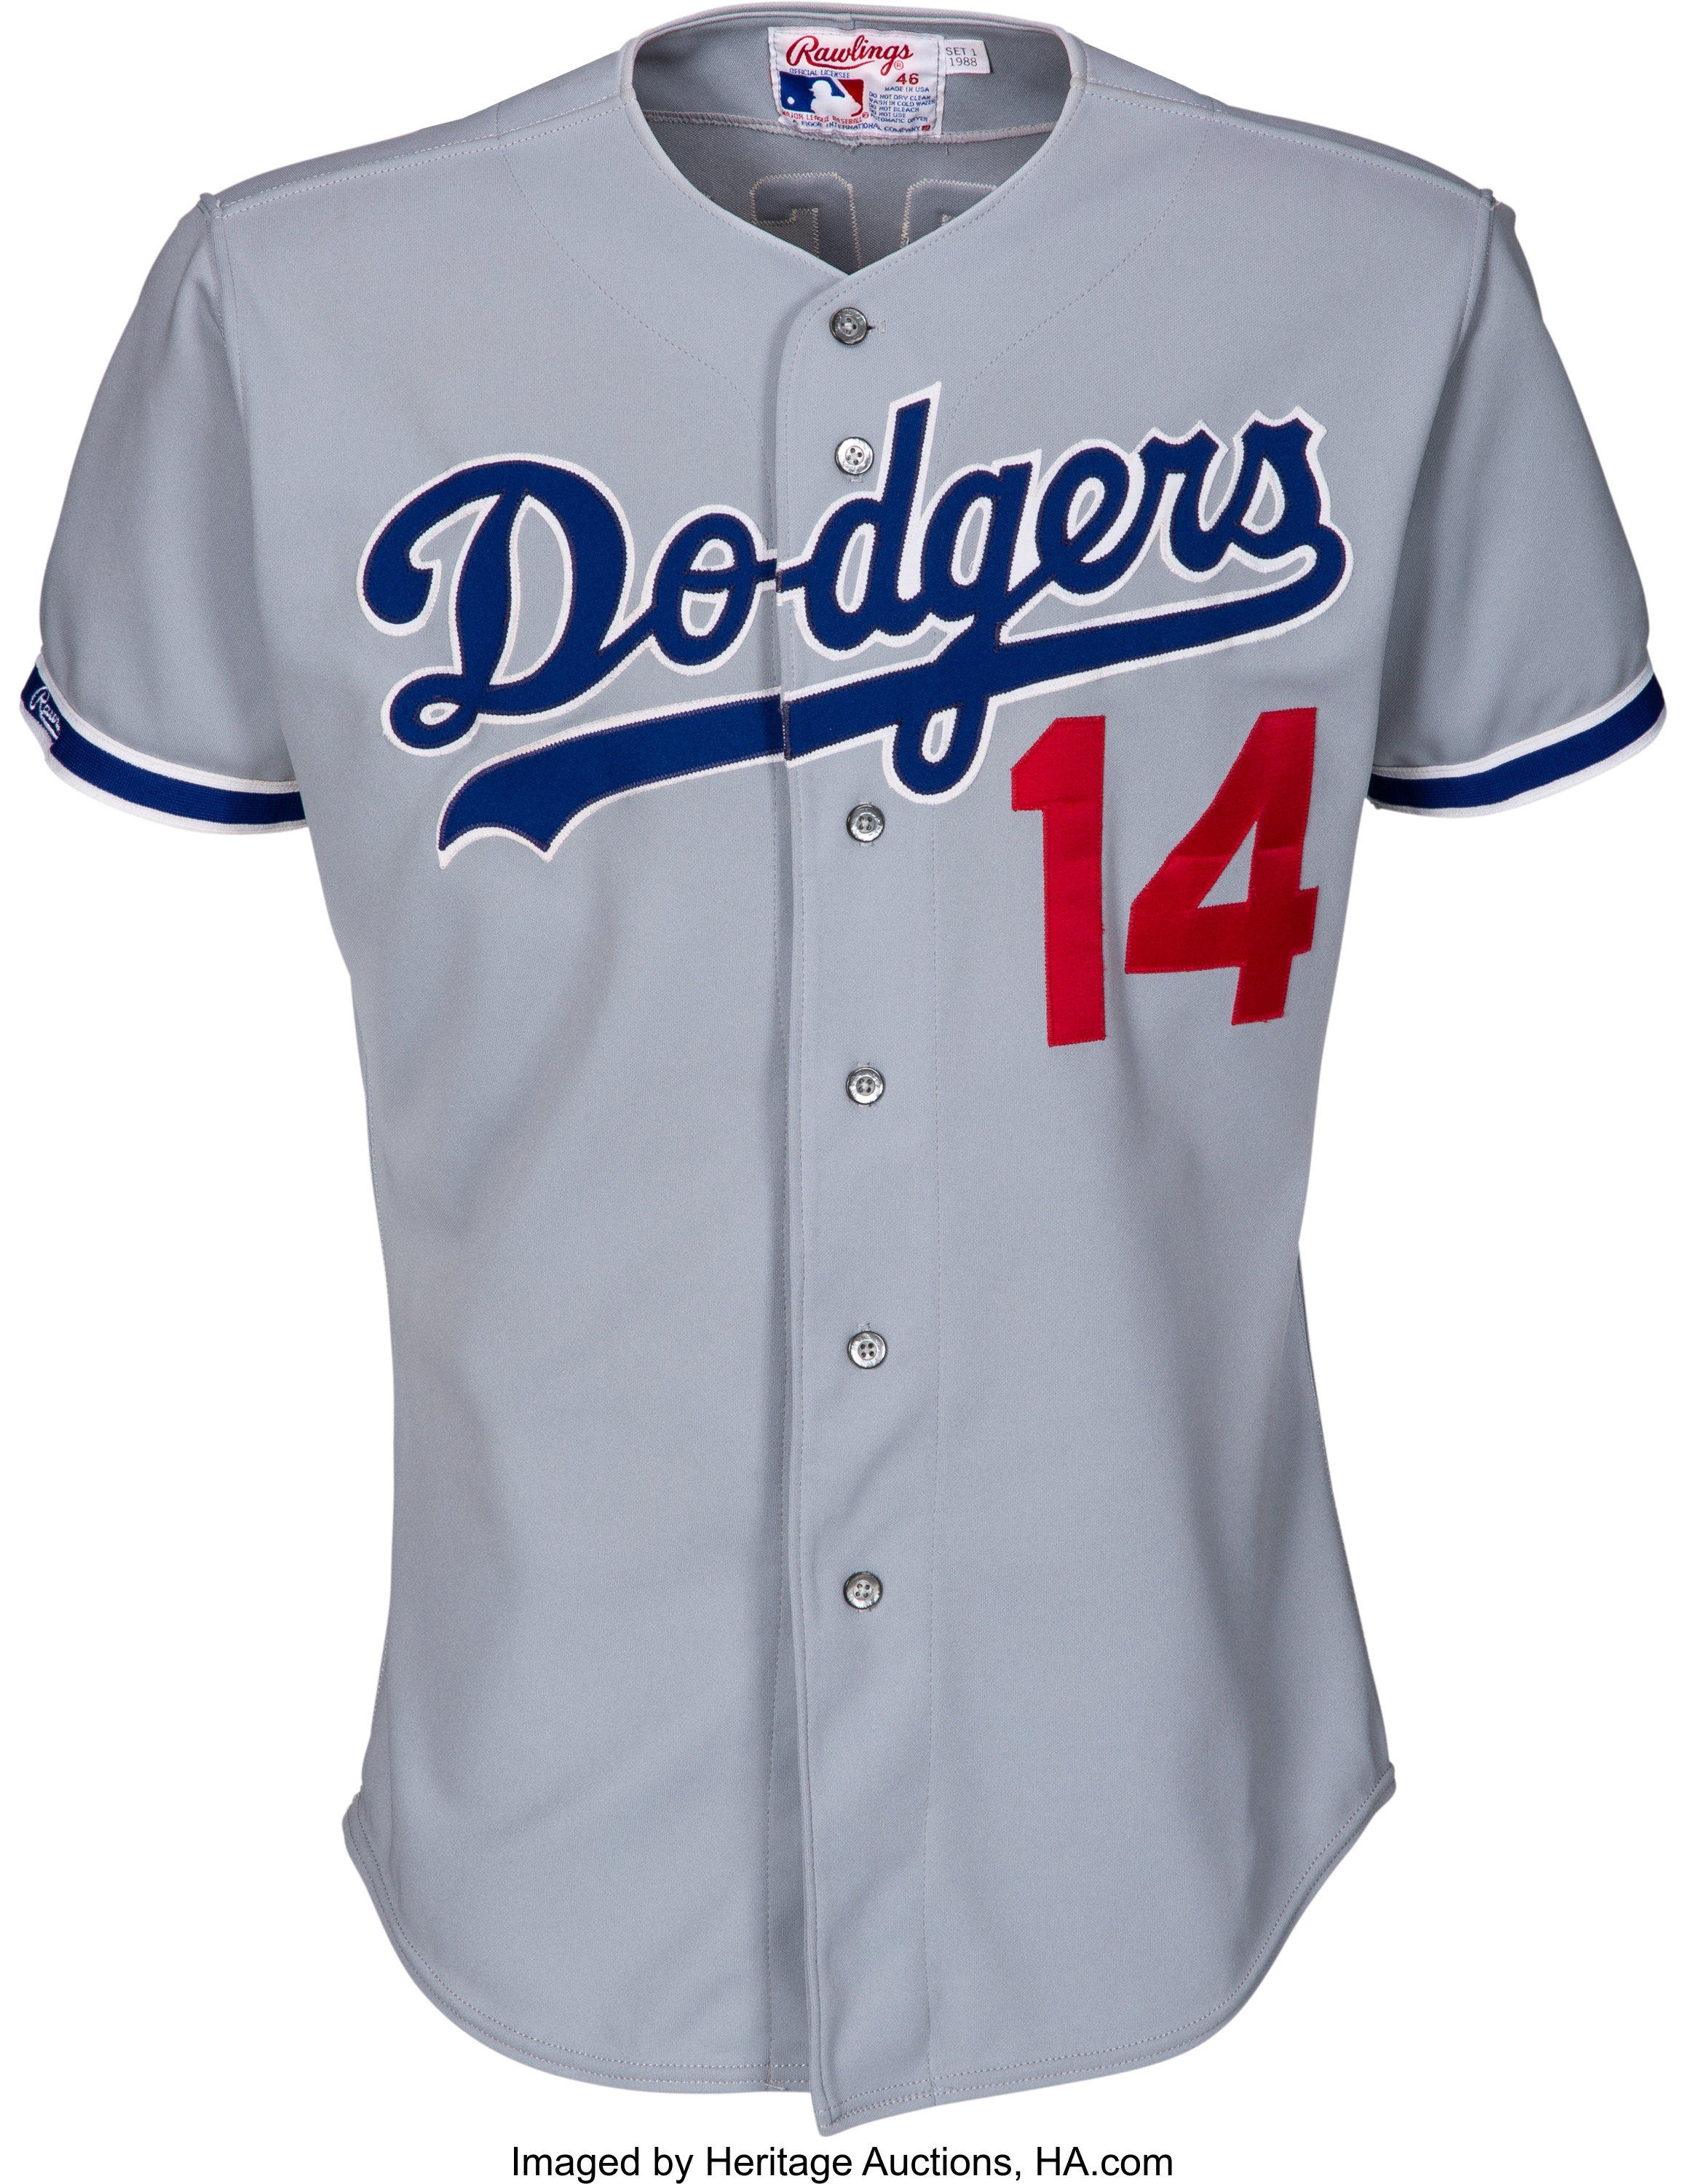 Los Angeles Dodgers Road Jersey Sony PlayStation Skin